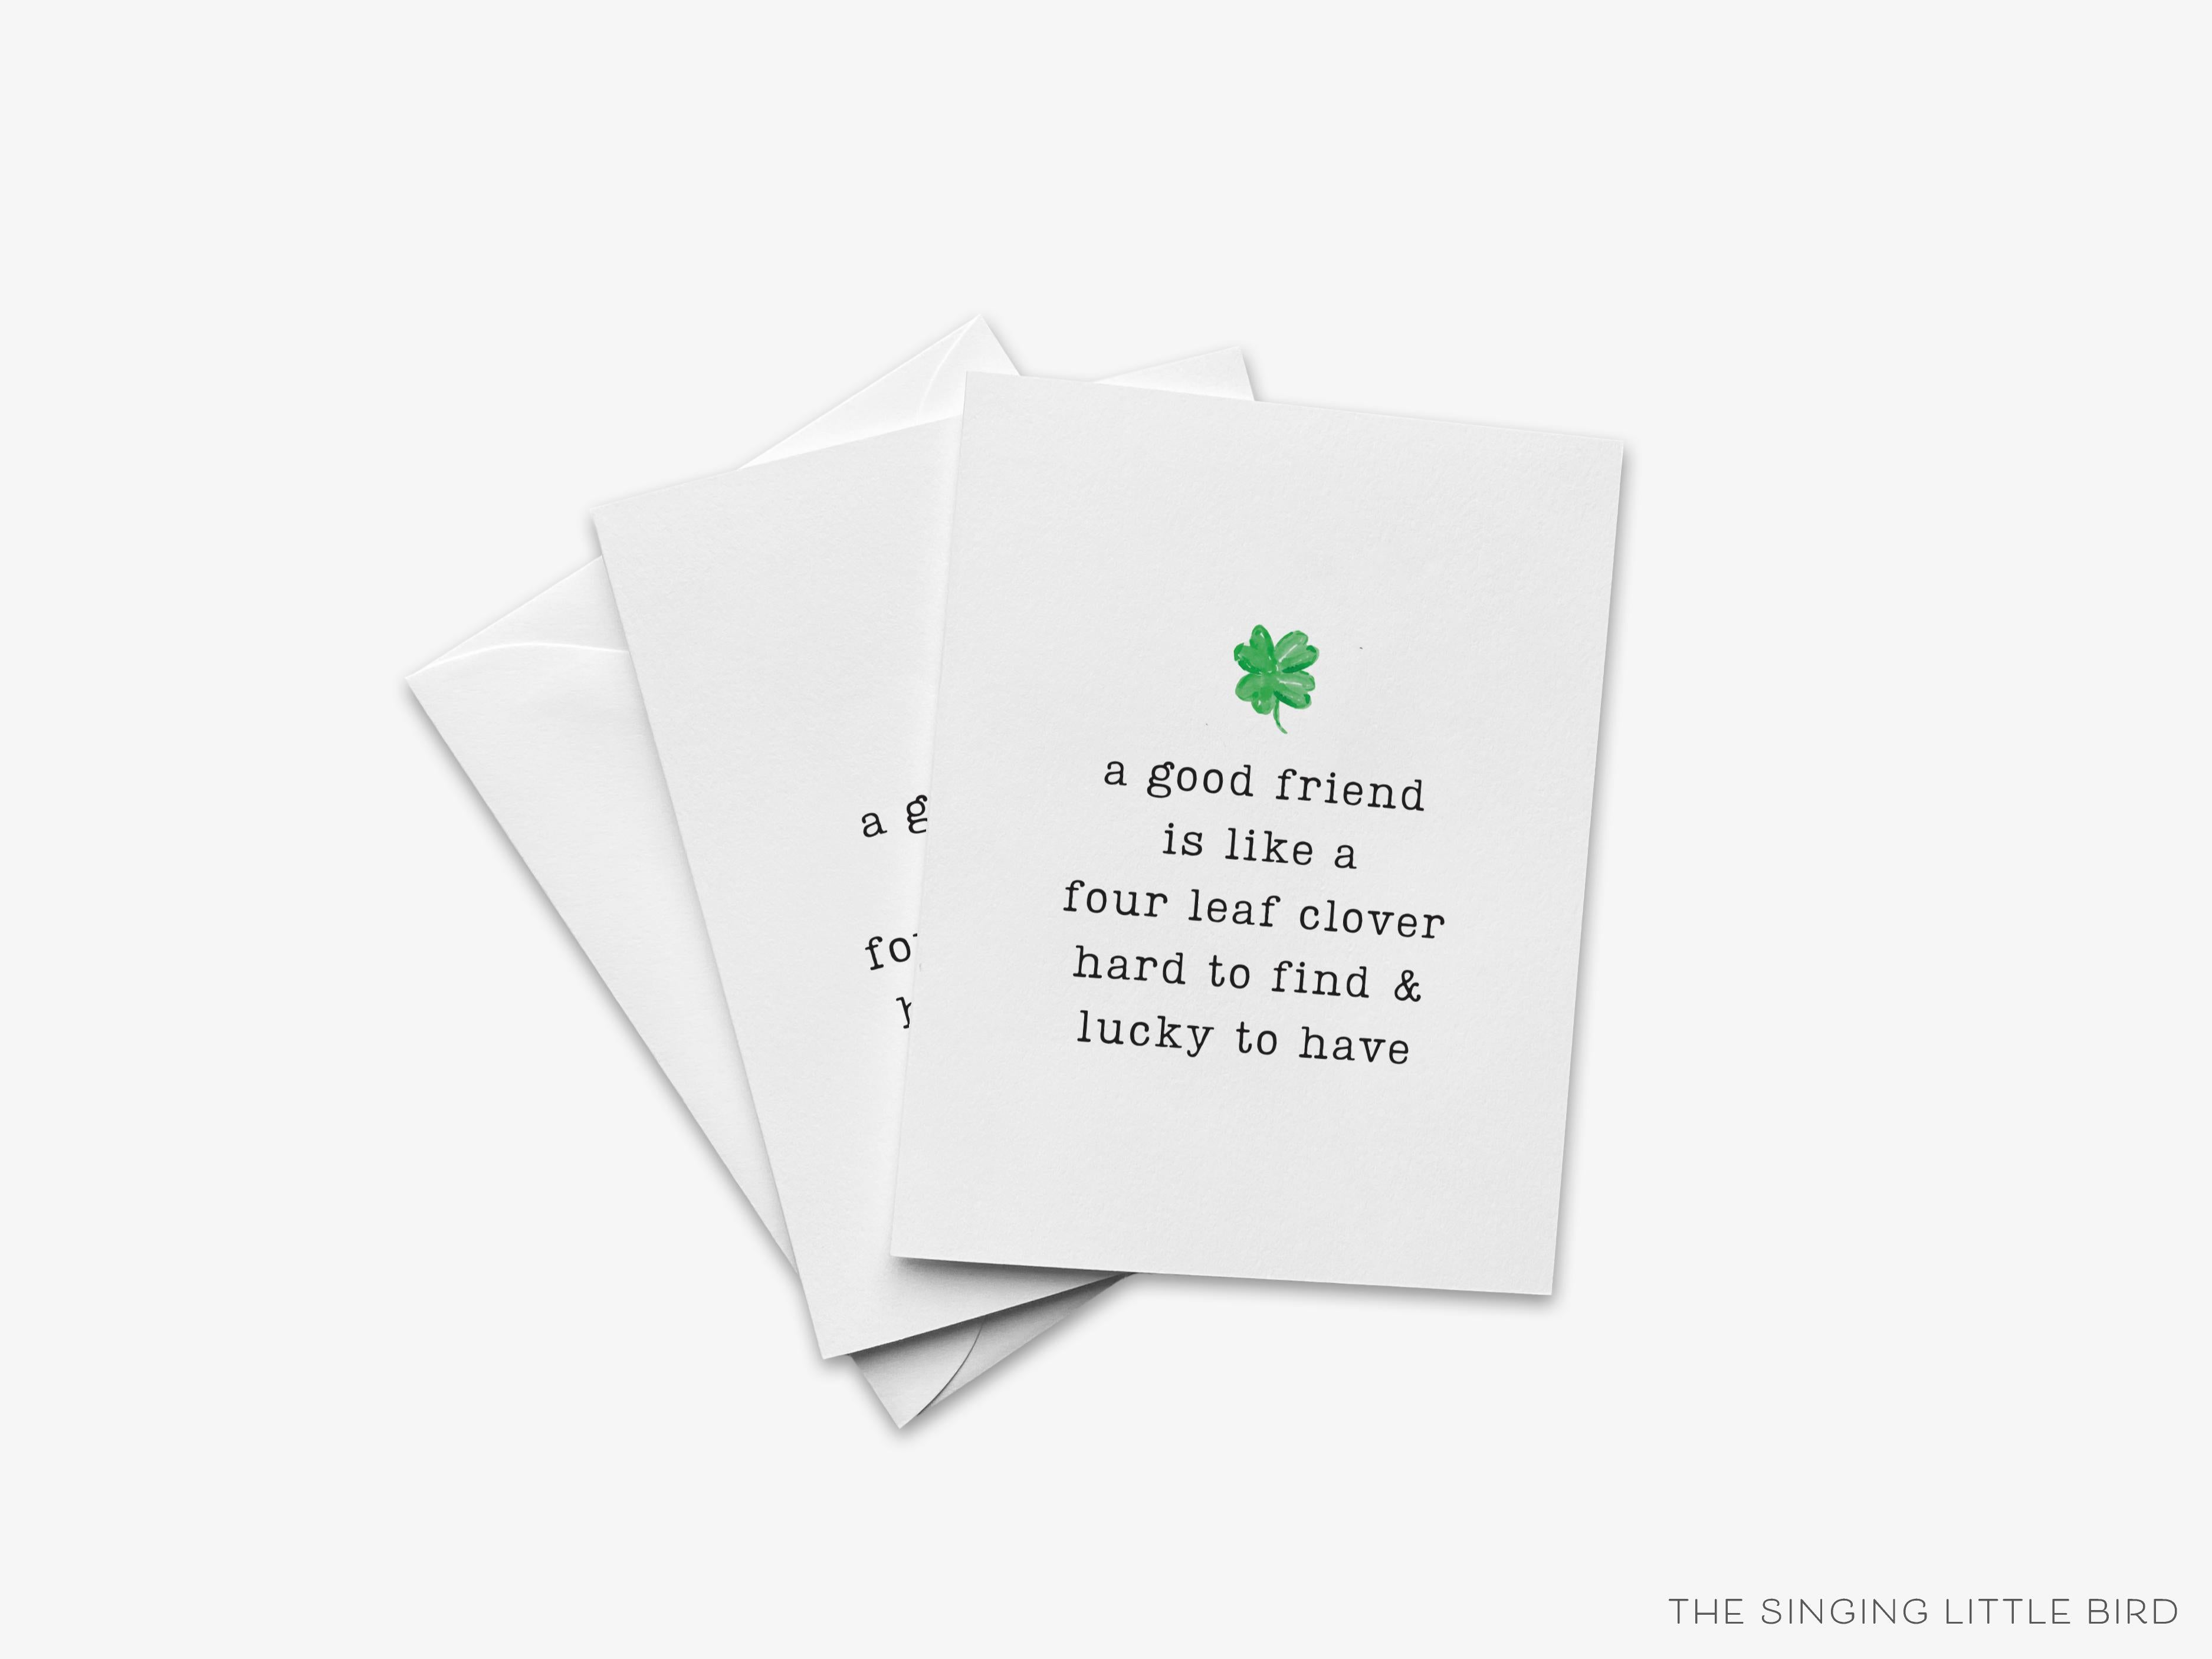 Four Leaf Clover Friendship Greeting Card-These folded spring cards are 4.25x5.5 and feature our hand-painted watercolor four leaf clover, printed in the USA on 100lb textured stock. They come with a White envelope and make a lovely card to say thank you or just because to your friends. -The Singing Little Bird